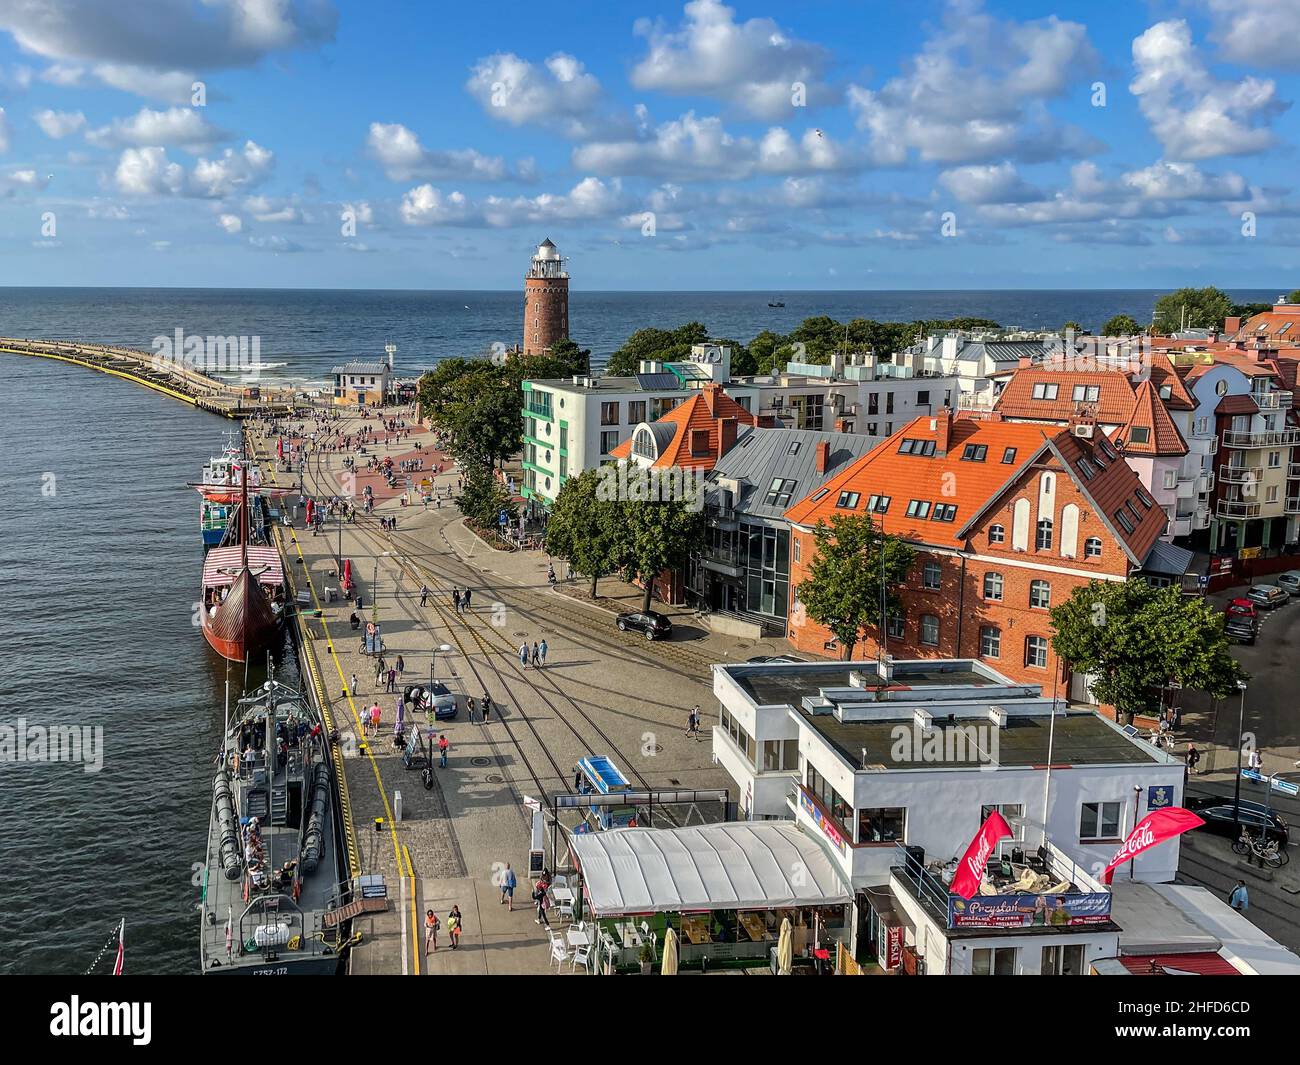 Port of Kolobrzeg is a Polish seaport located at the Parseta river. Port has a yacht harbour, fishing harbour, ferry harbour. Stock Photo